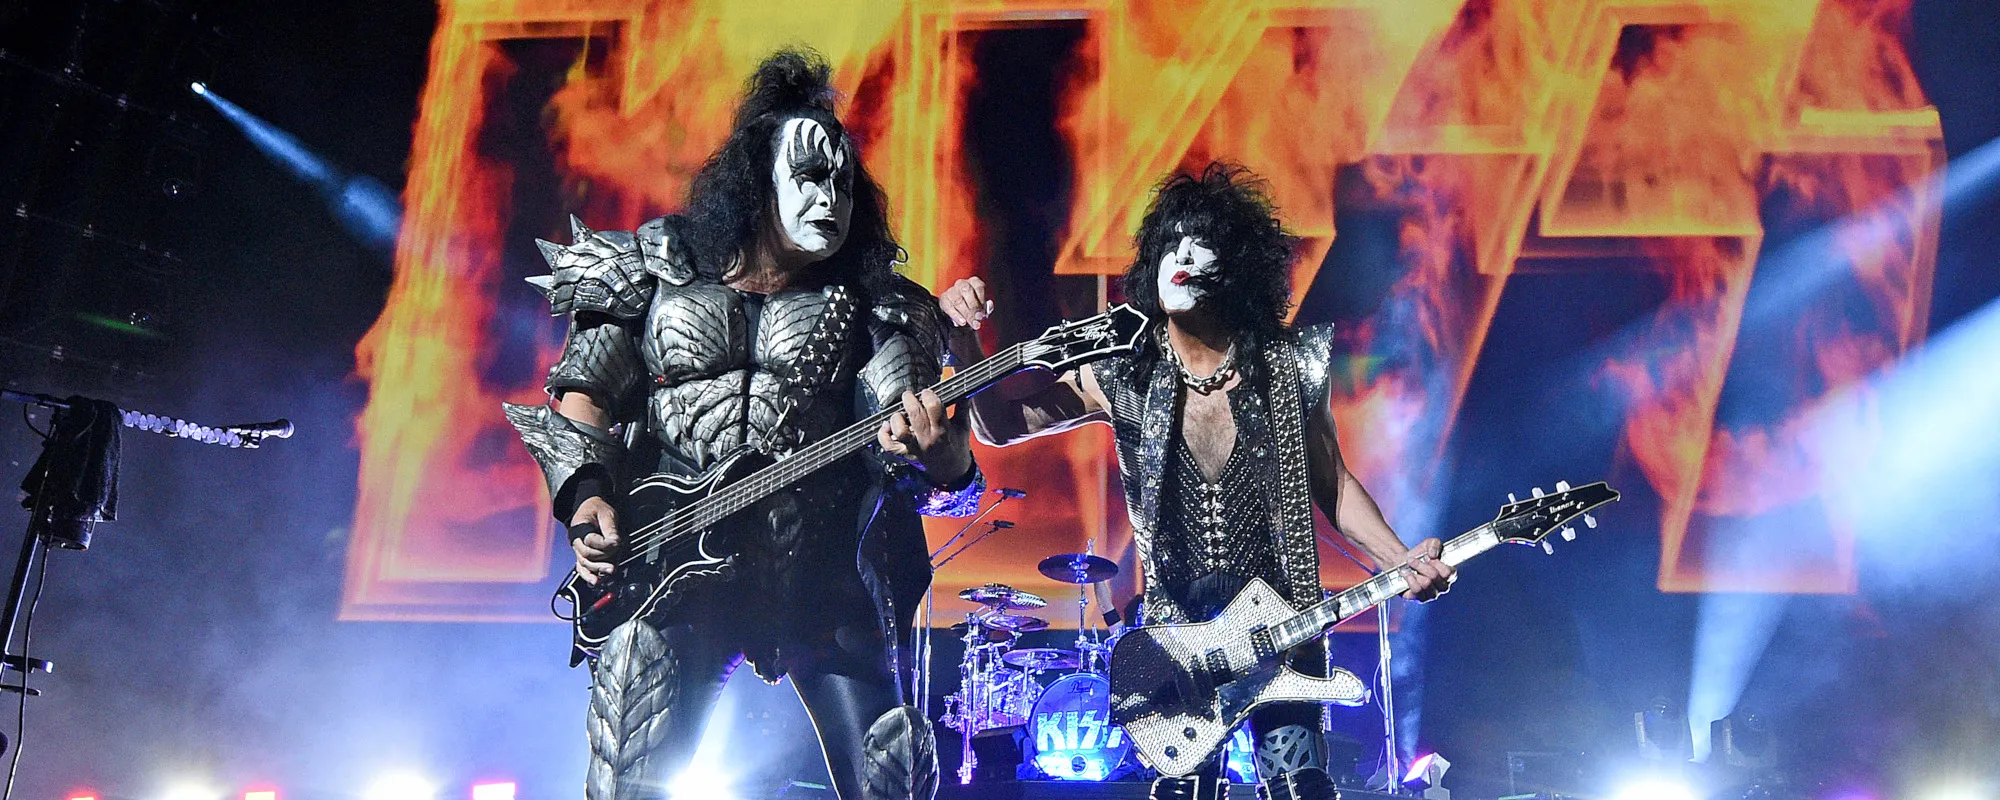 KISS Reveal Final Tour Dates of Their Career